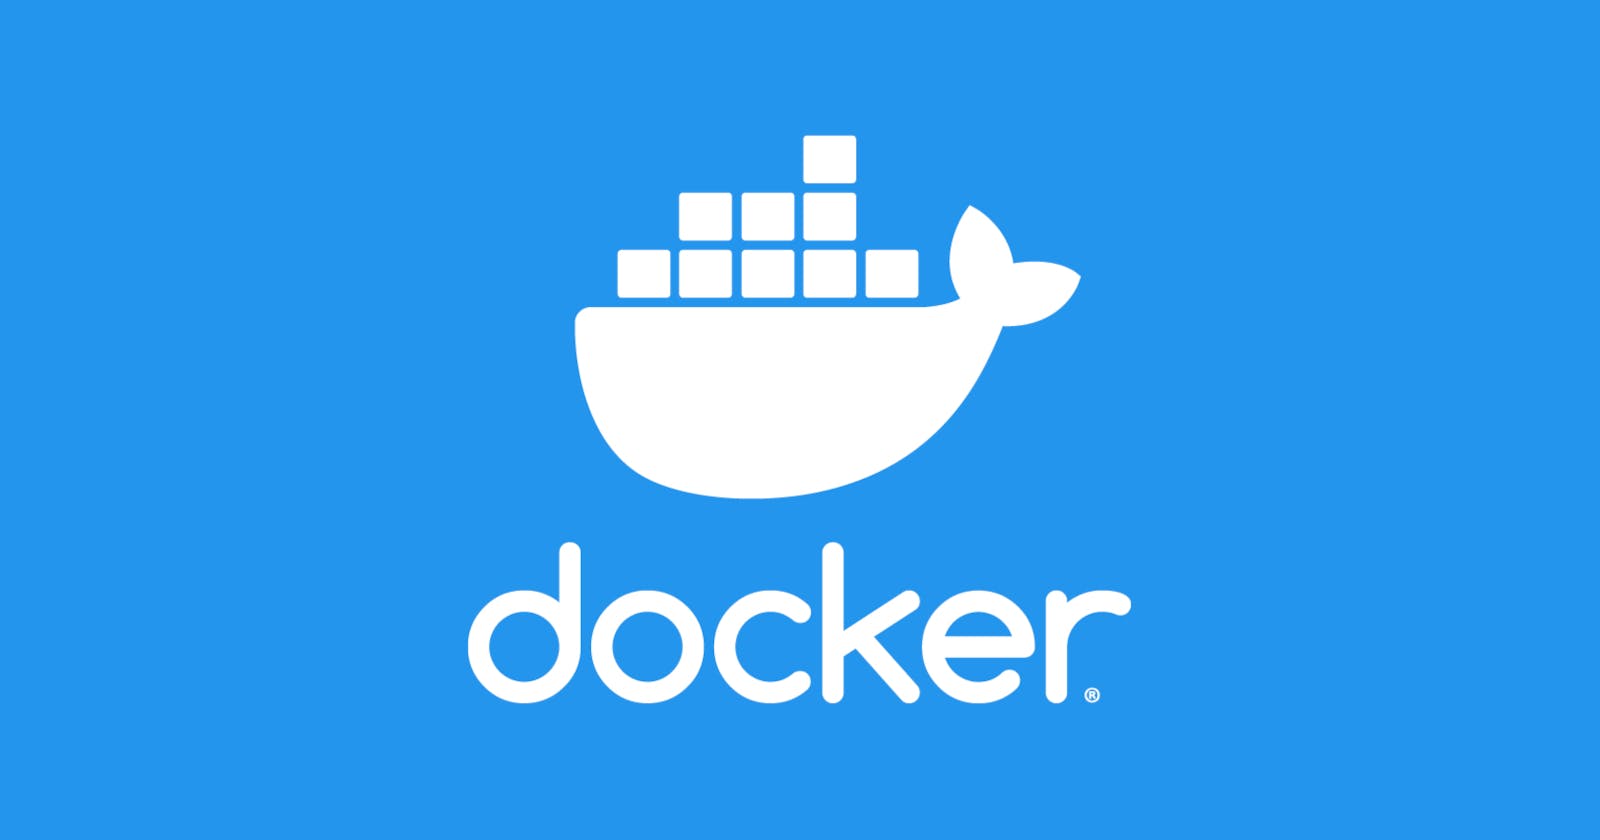 Building docker images for x86_64 with an Apple Silicon CPU.